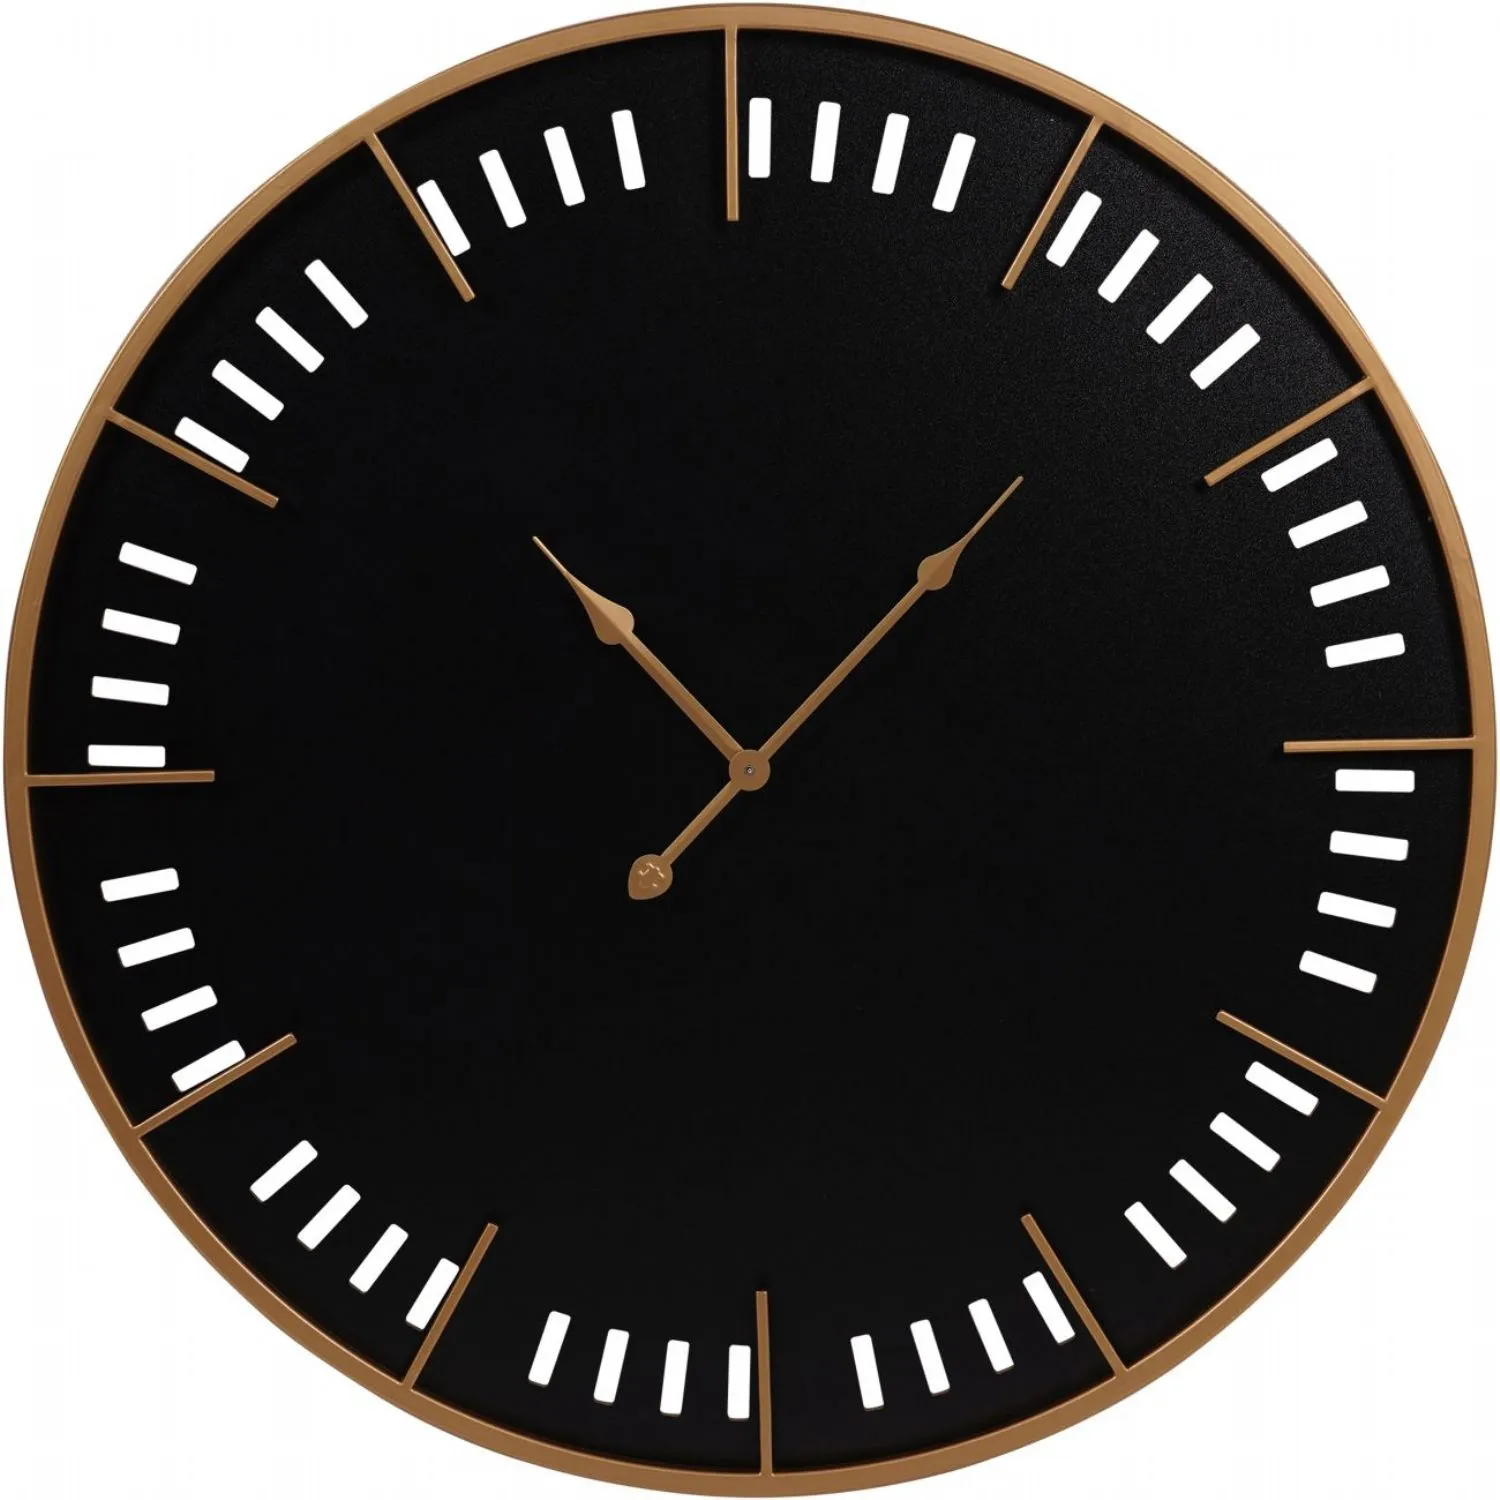 Perforated Black and Gold Indoor Wall Clock